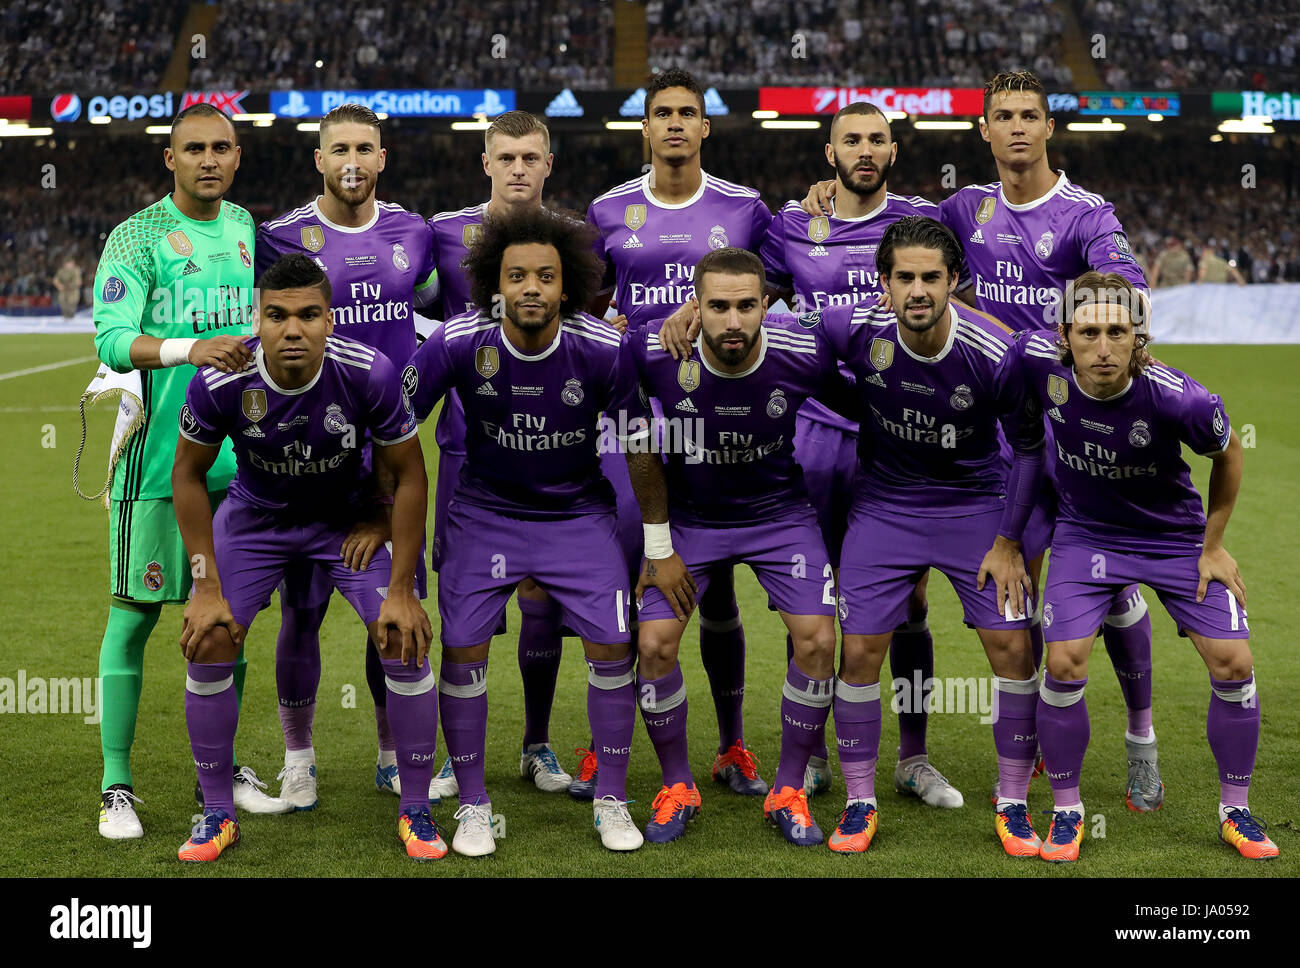 Real madrid players